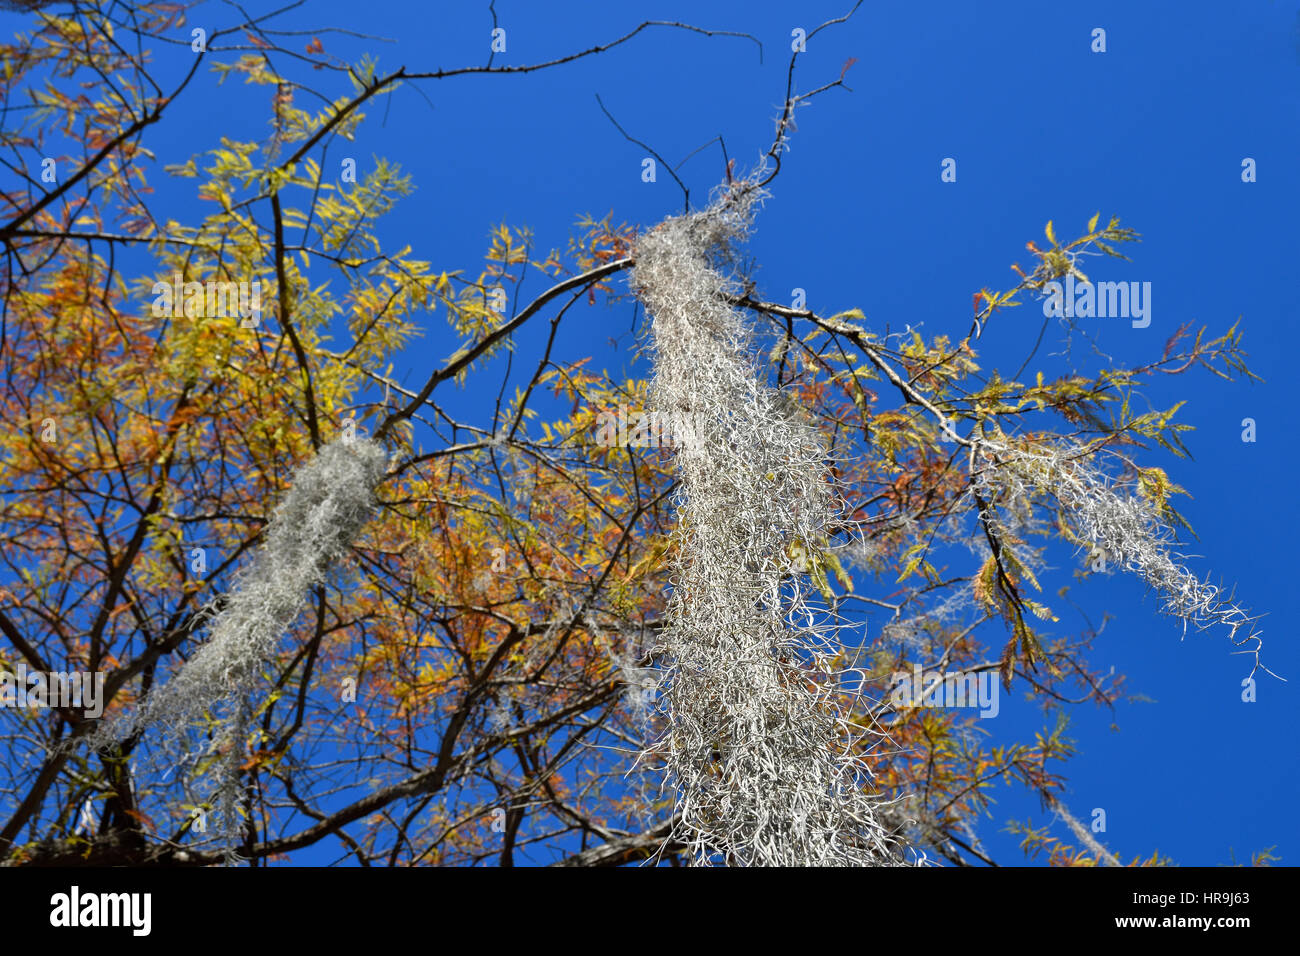 Tree with Spanish moss (Tillandsia usneoides) hanging from branches, picture from Botanical garden inPuerto de la Cruz Tenerife Spain. Stock Photo